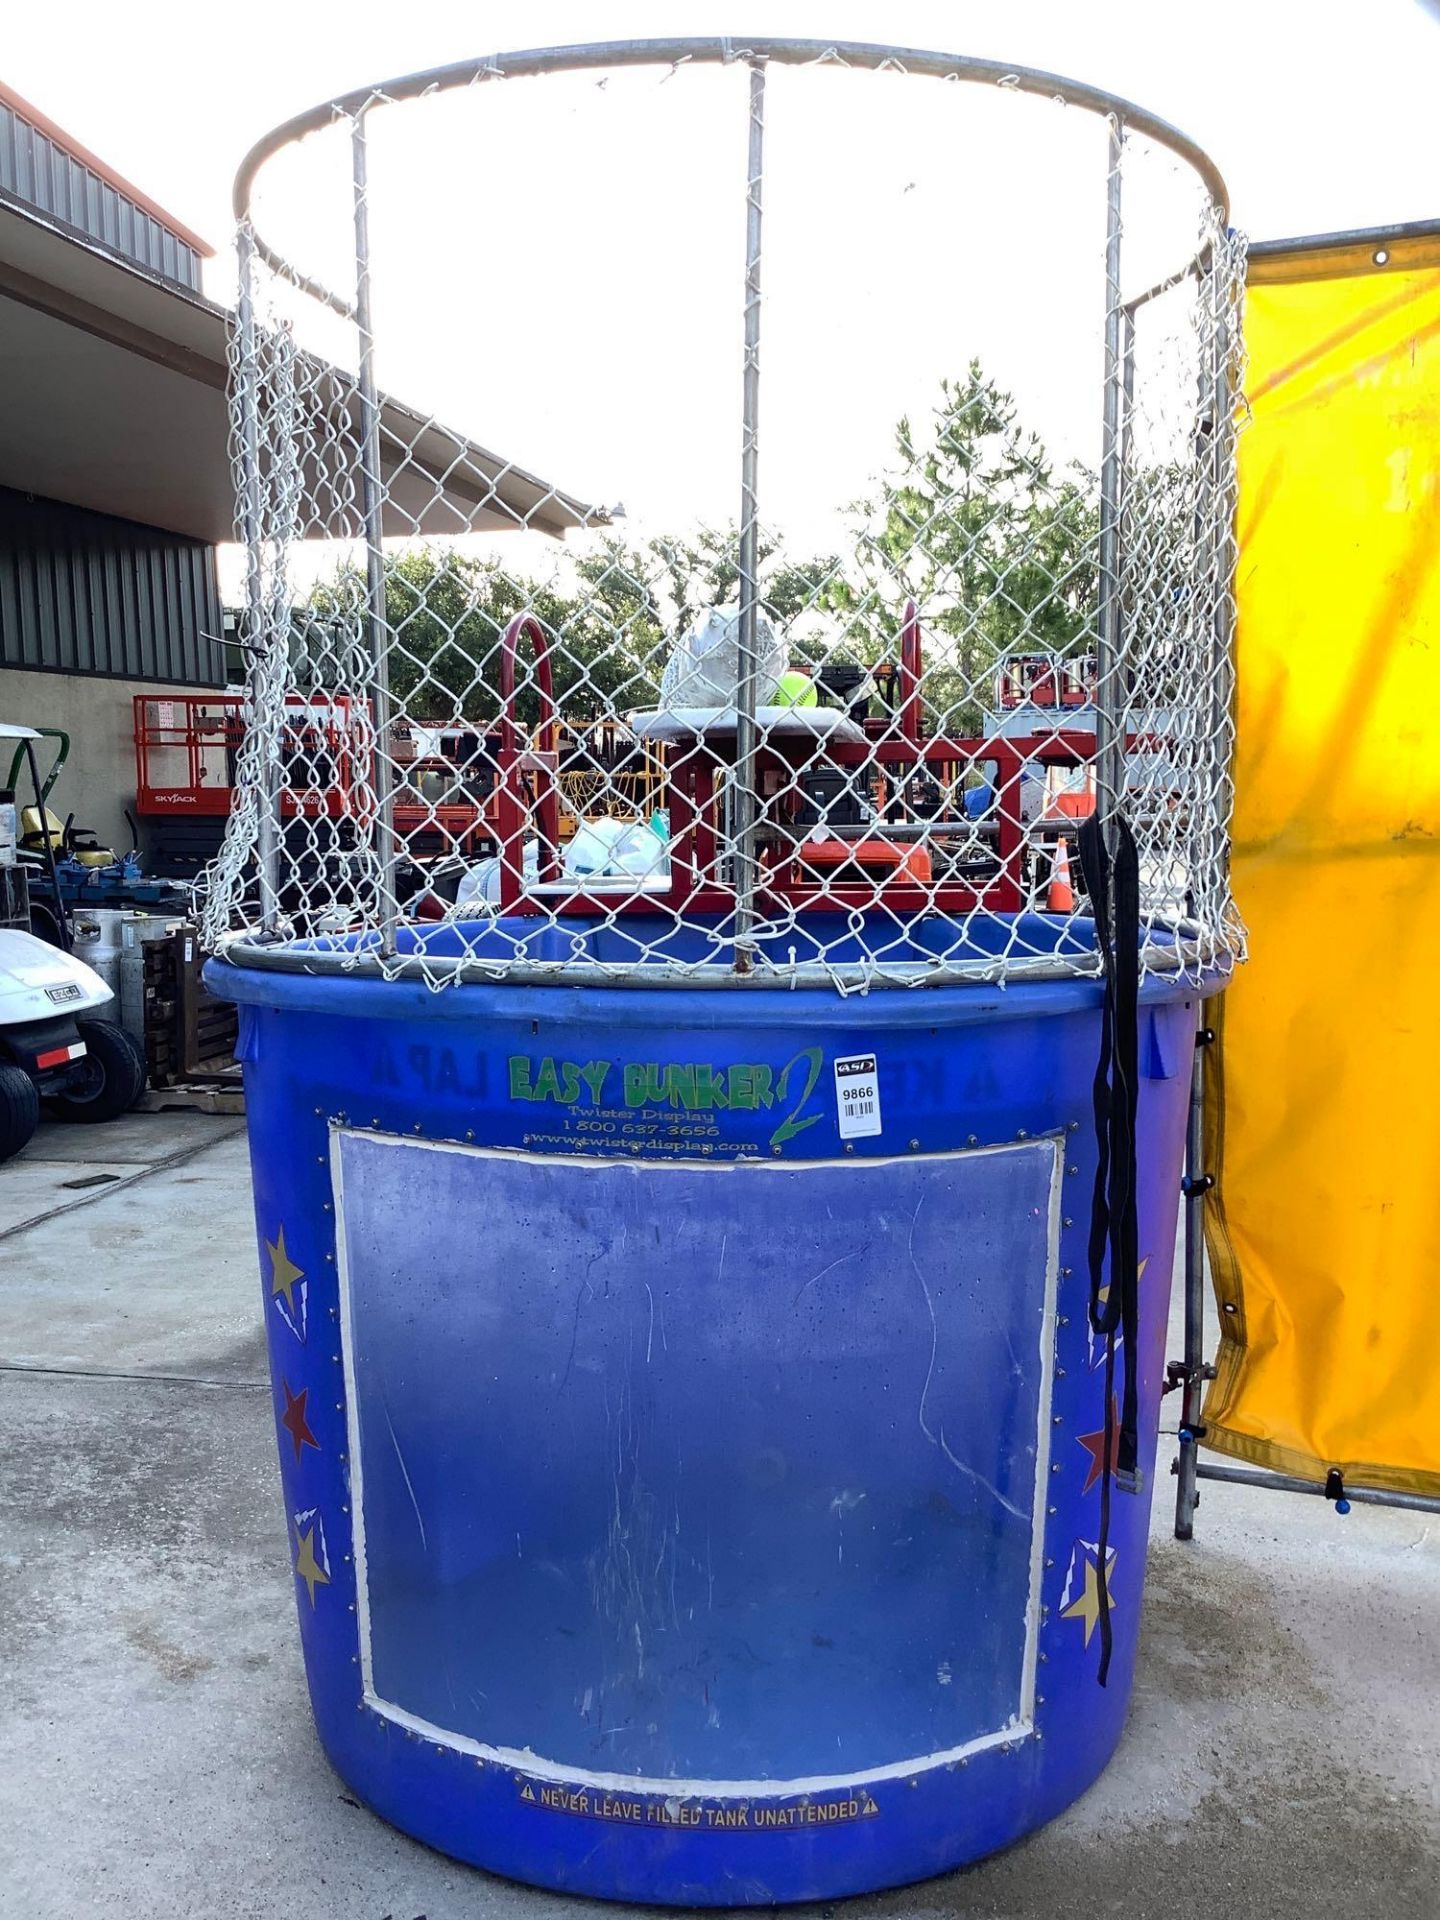 TWISTER DISPLAY EASY DUNKER 2 DUNK TANK, TRAILER MOUNTED - Image 13 of 20